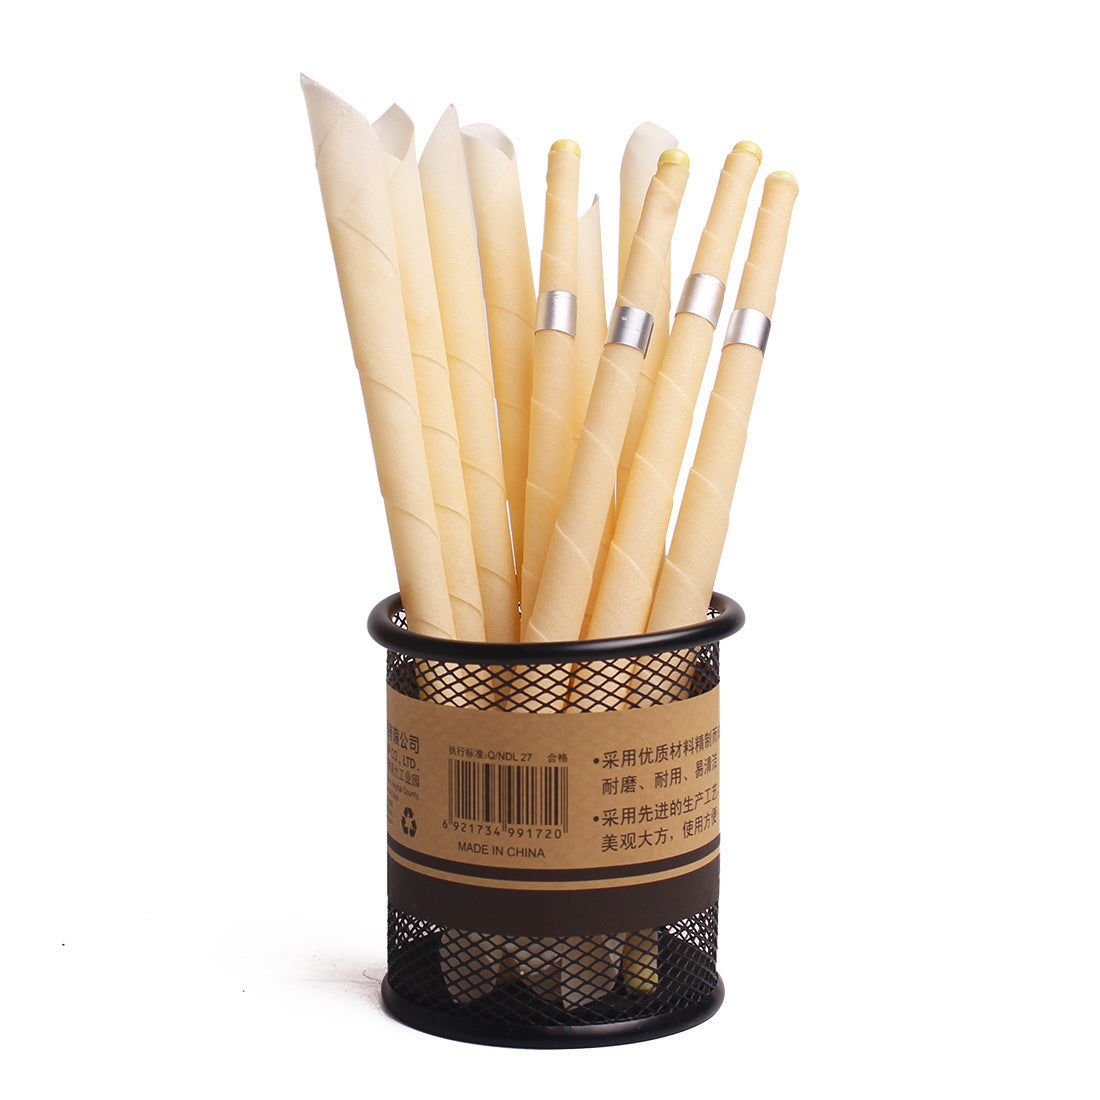 Coning Beewax Natural Earwax Candle